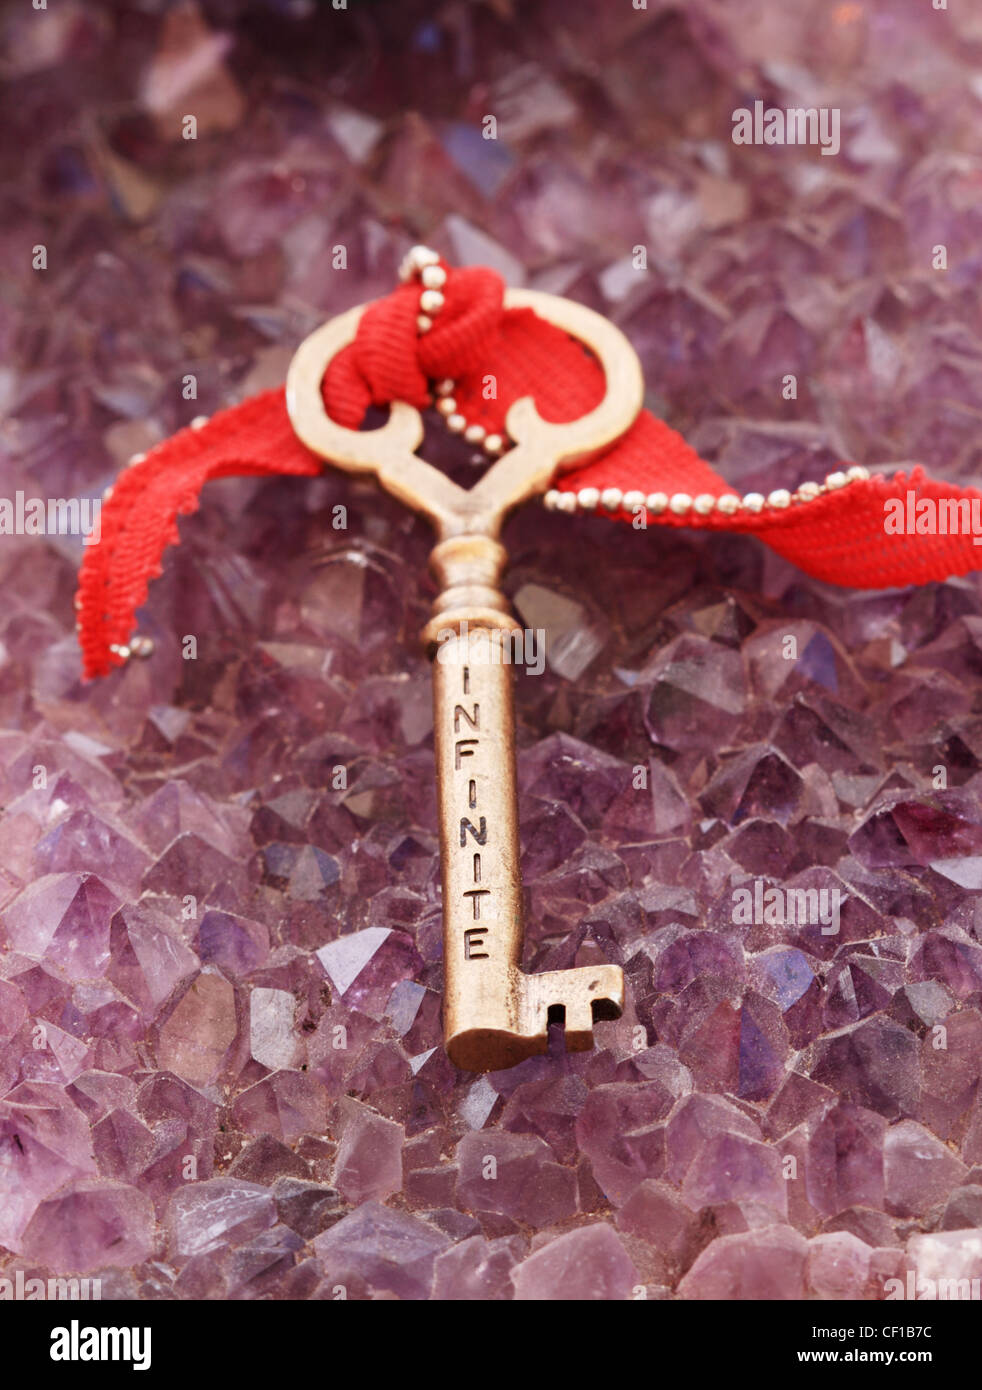 infinite written on an antique brass key sitting on amethyst crystals Stock Photo